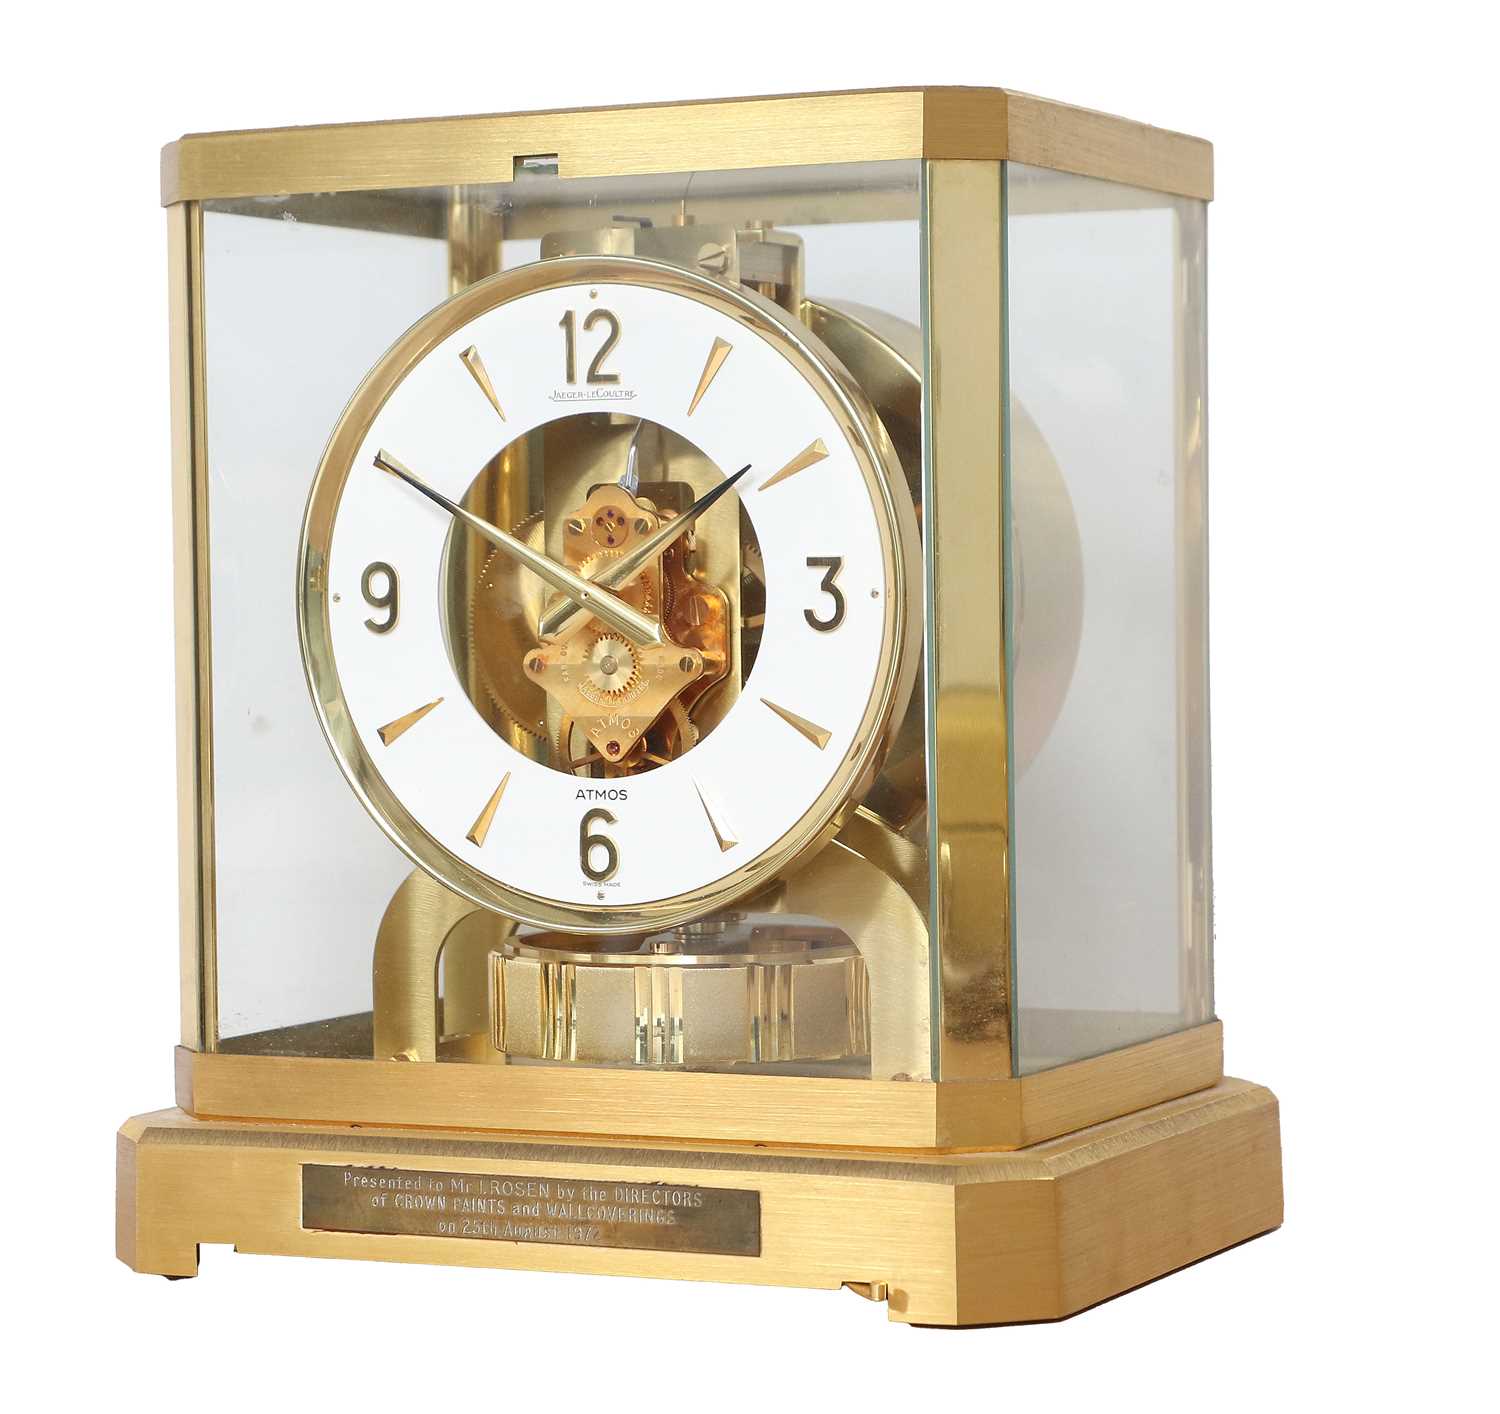 A Brass Atmos Clock, signed Jaeger LeCoultre, 20th Century, case with glass panels, front of the - Image 2 of 6